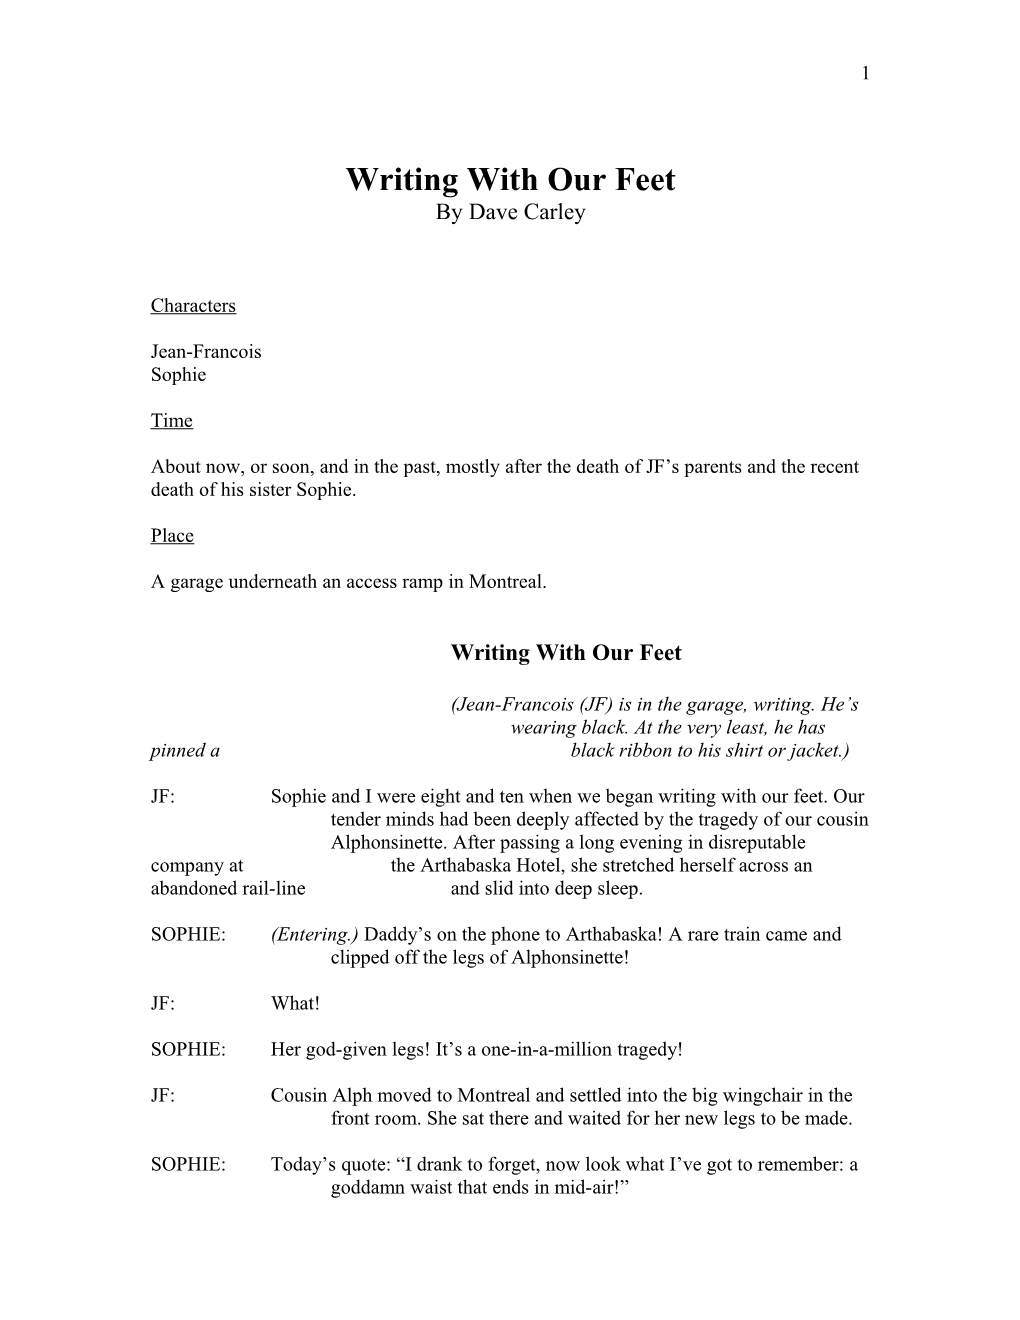 Writing with Our Feet